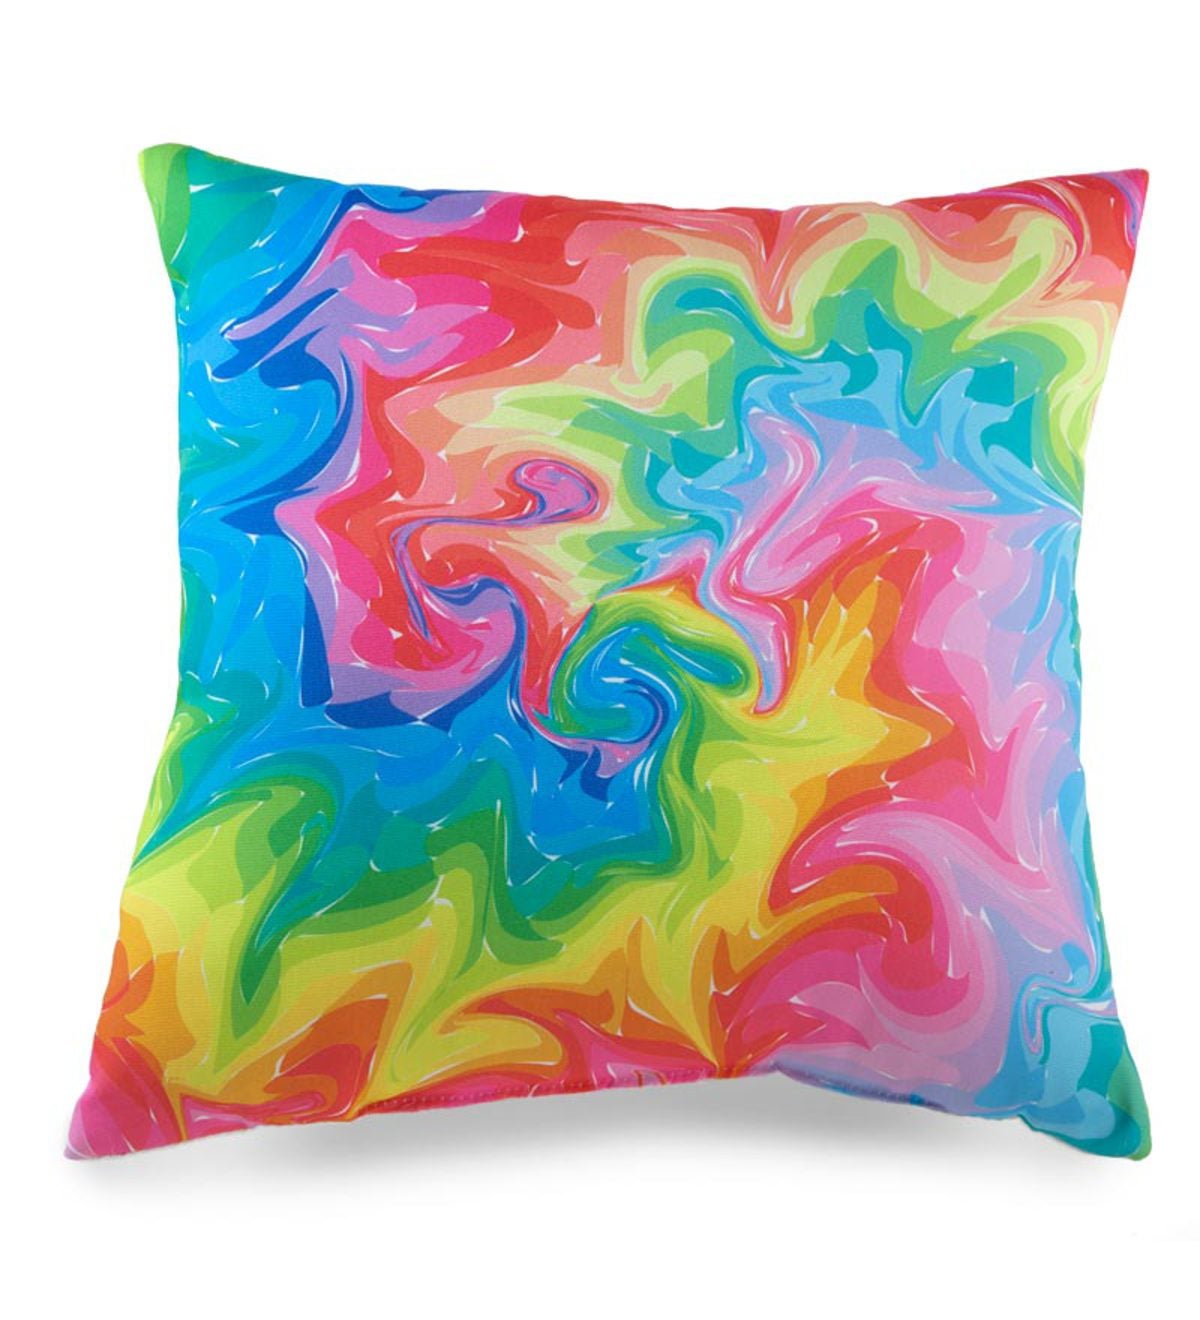 Colorful Swirl Photo-Printed Throw Pillow